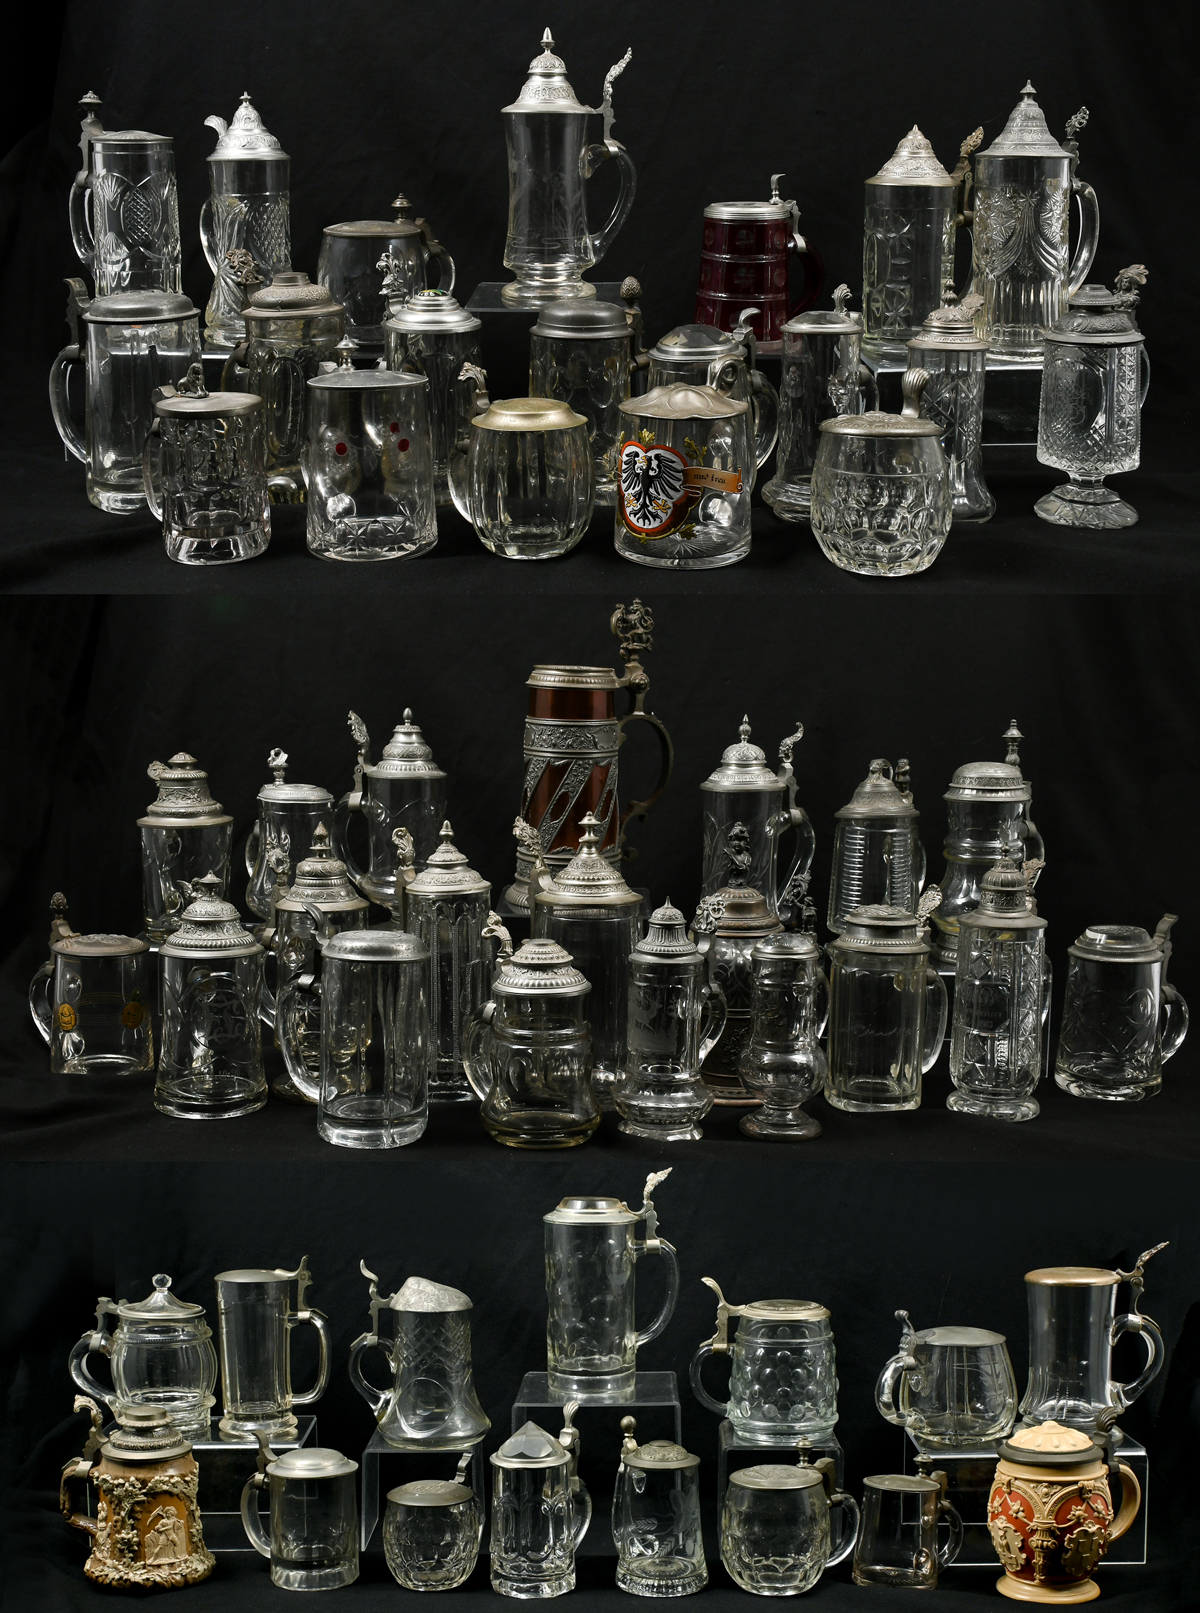 MASSIVE STEIN COLLECTION: 1) Large collection